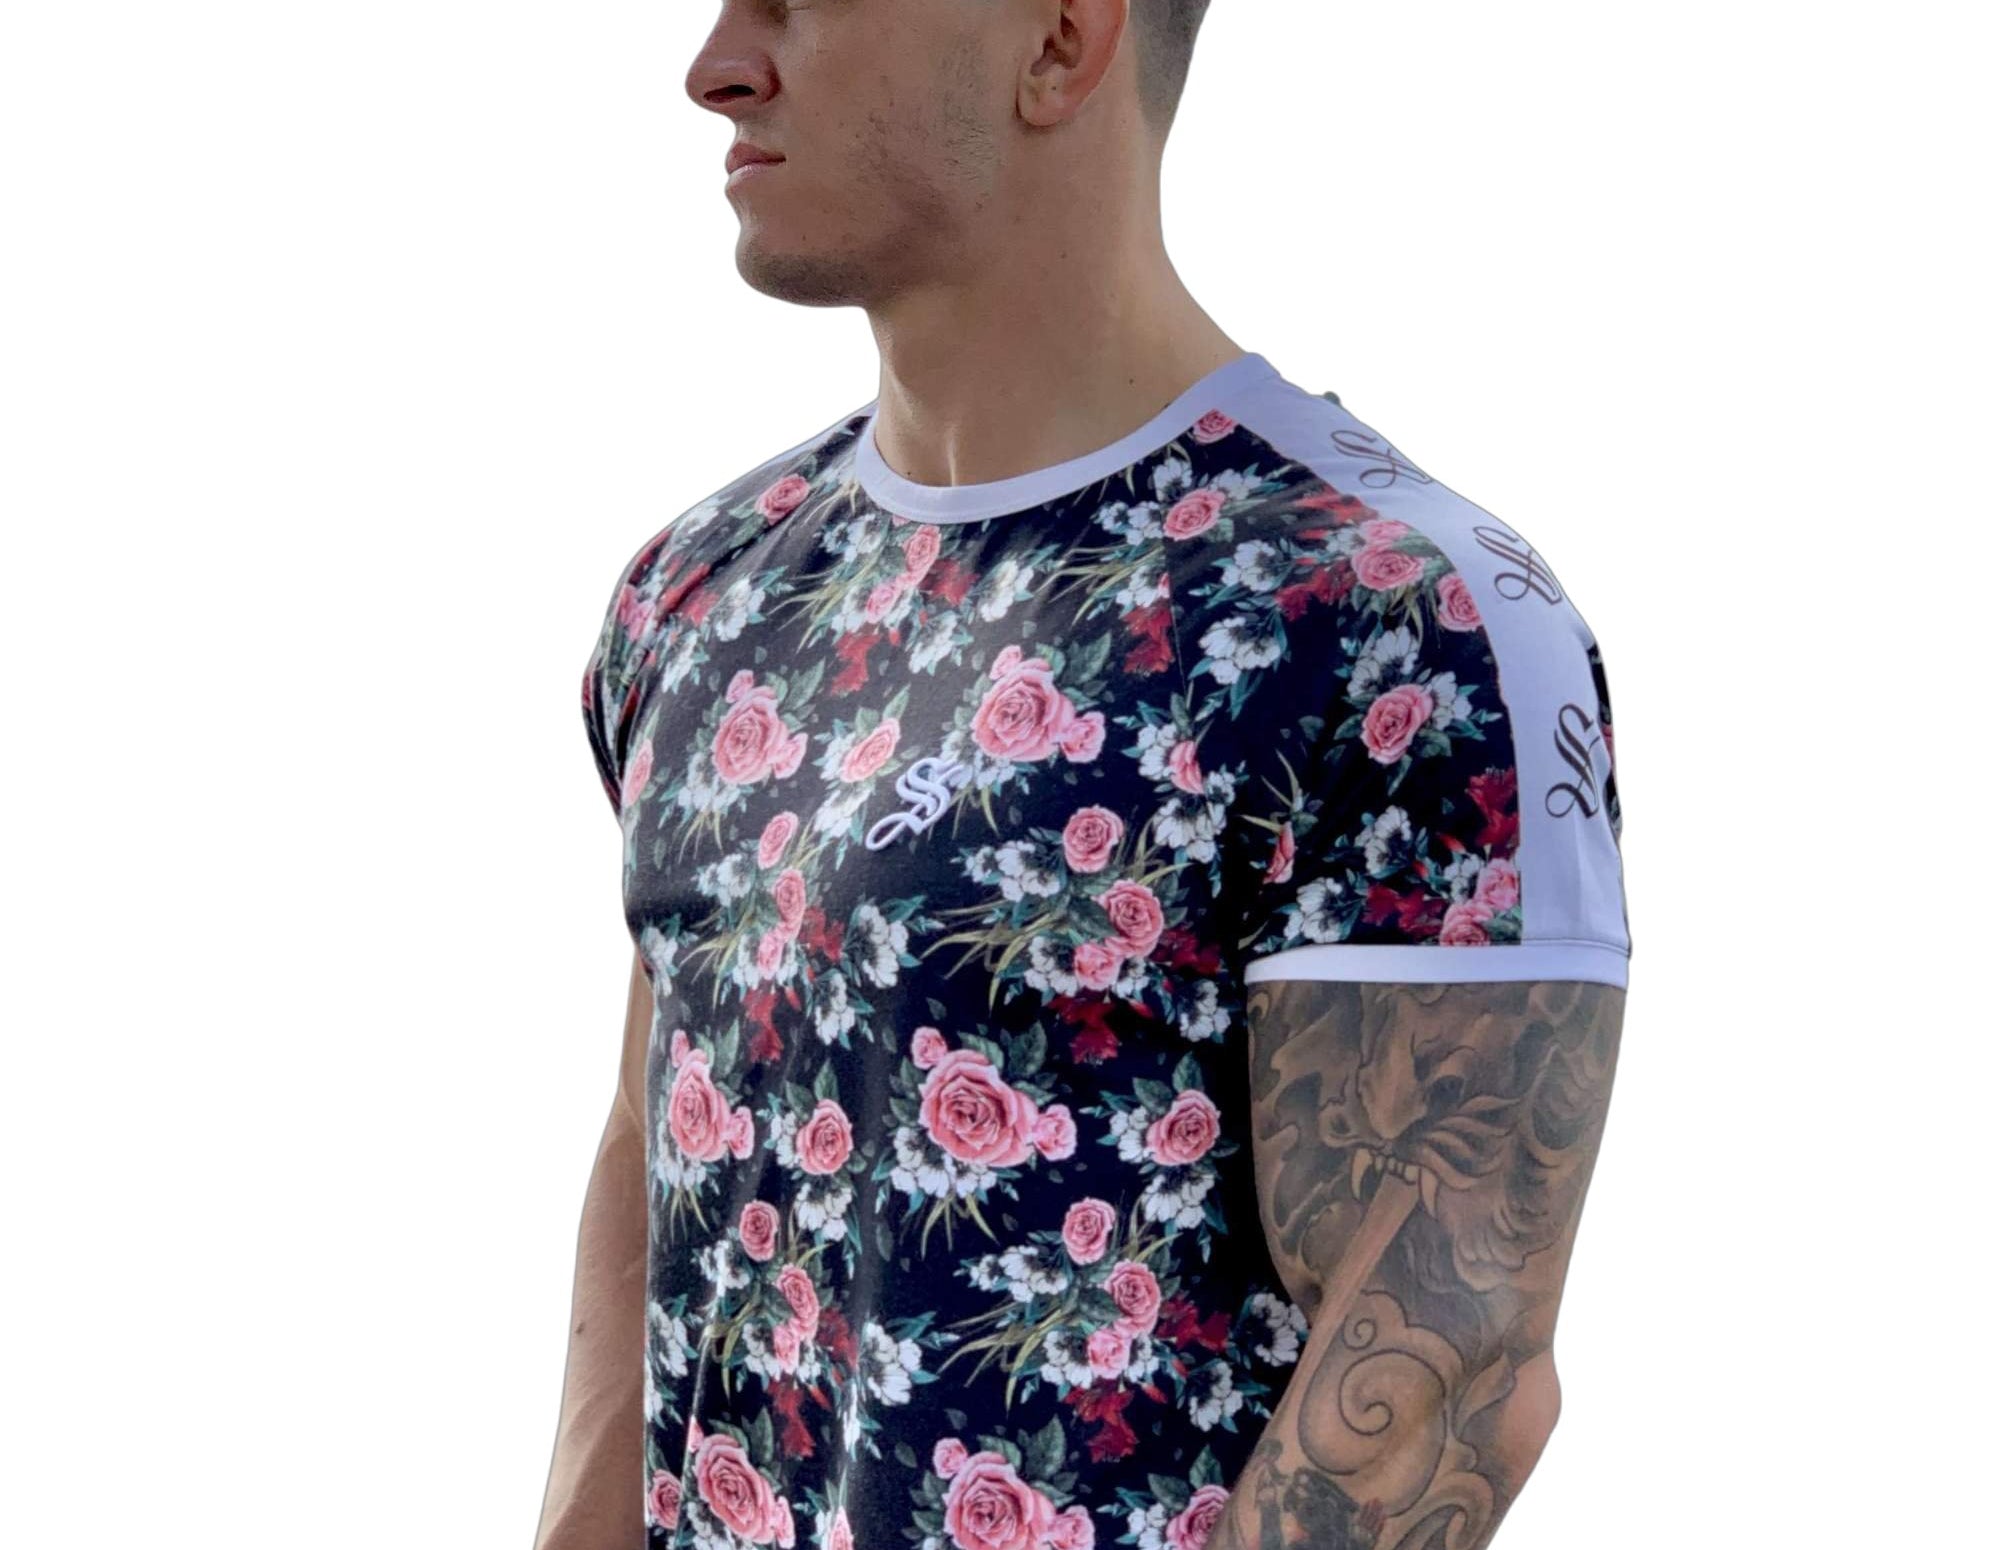 Lover Boy - Flower Design T-shirt for Men - Sarman Fashion - Wholesale Clothing Fashion Brand for Men from Canada